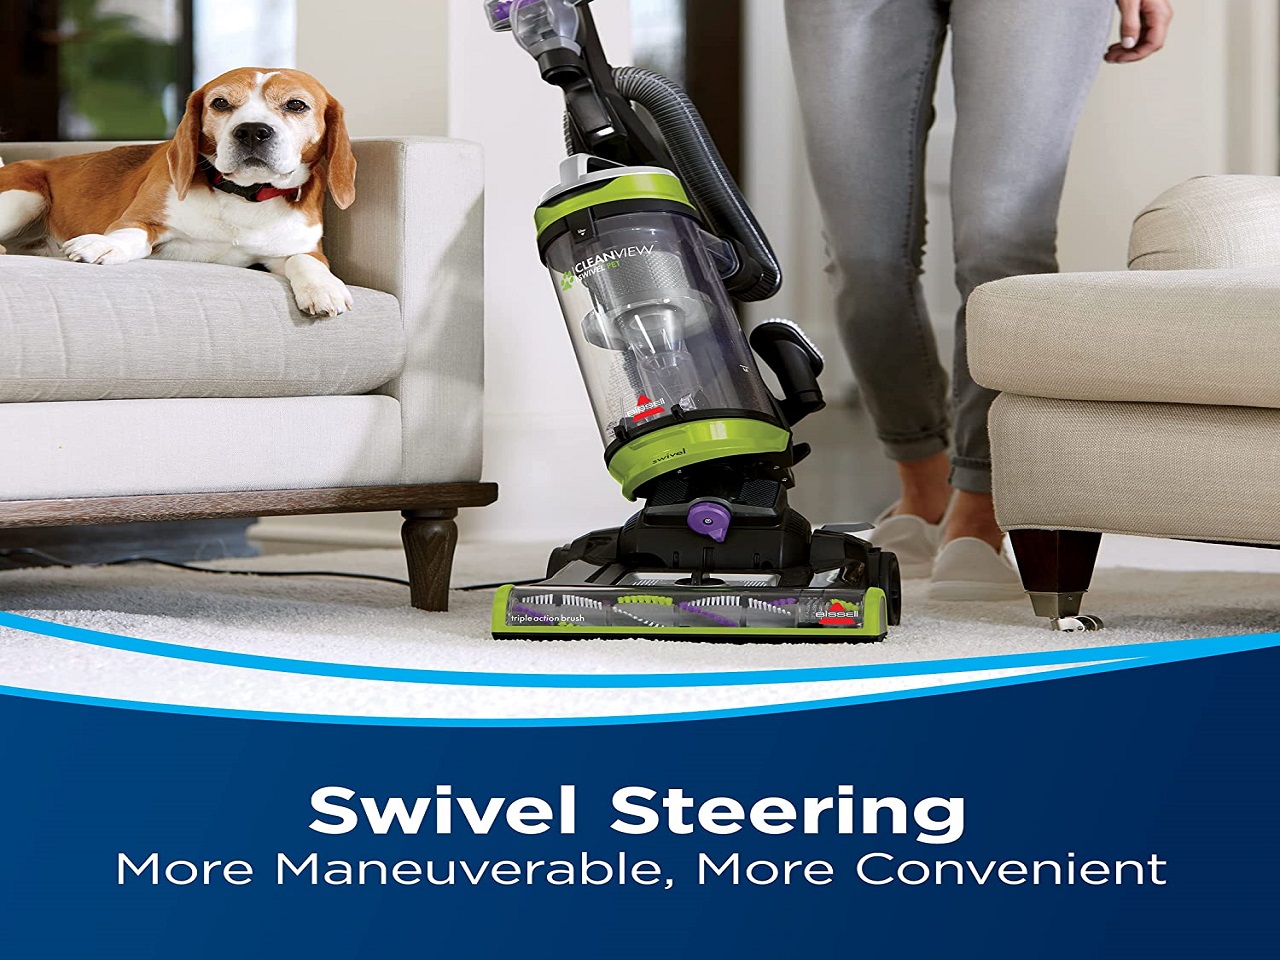 How to find the best broom vacuum cleaners for pets